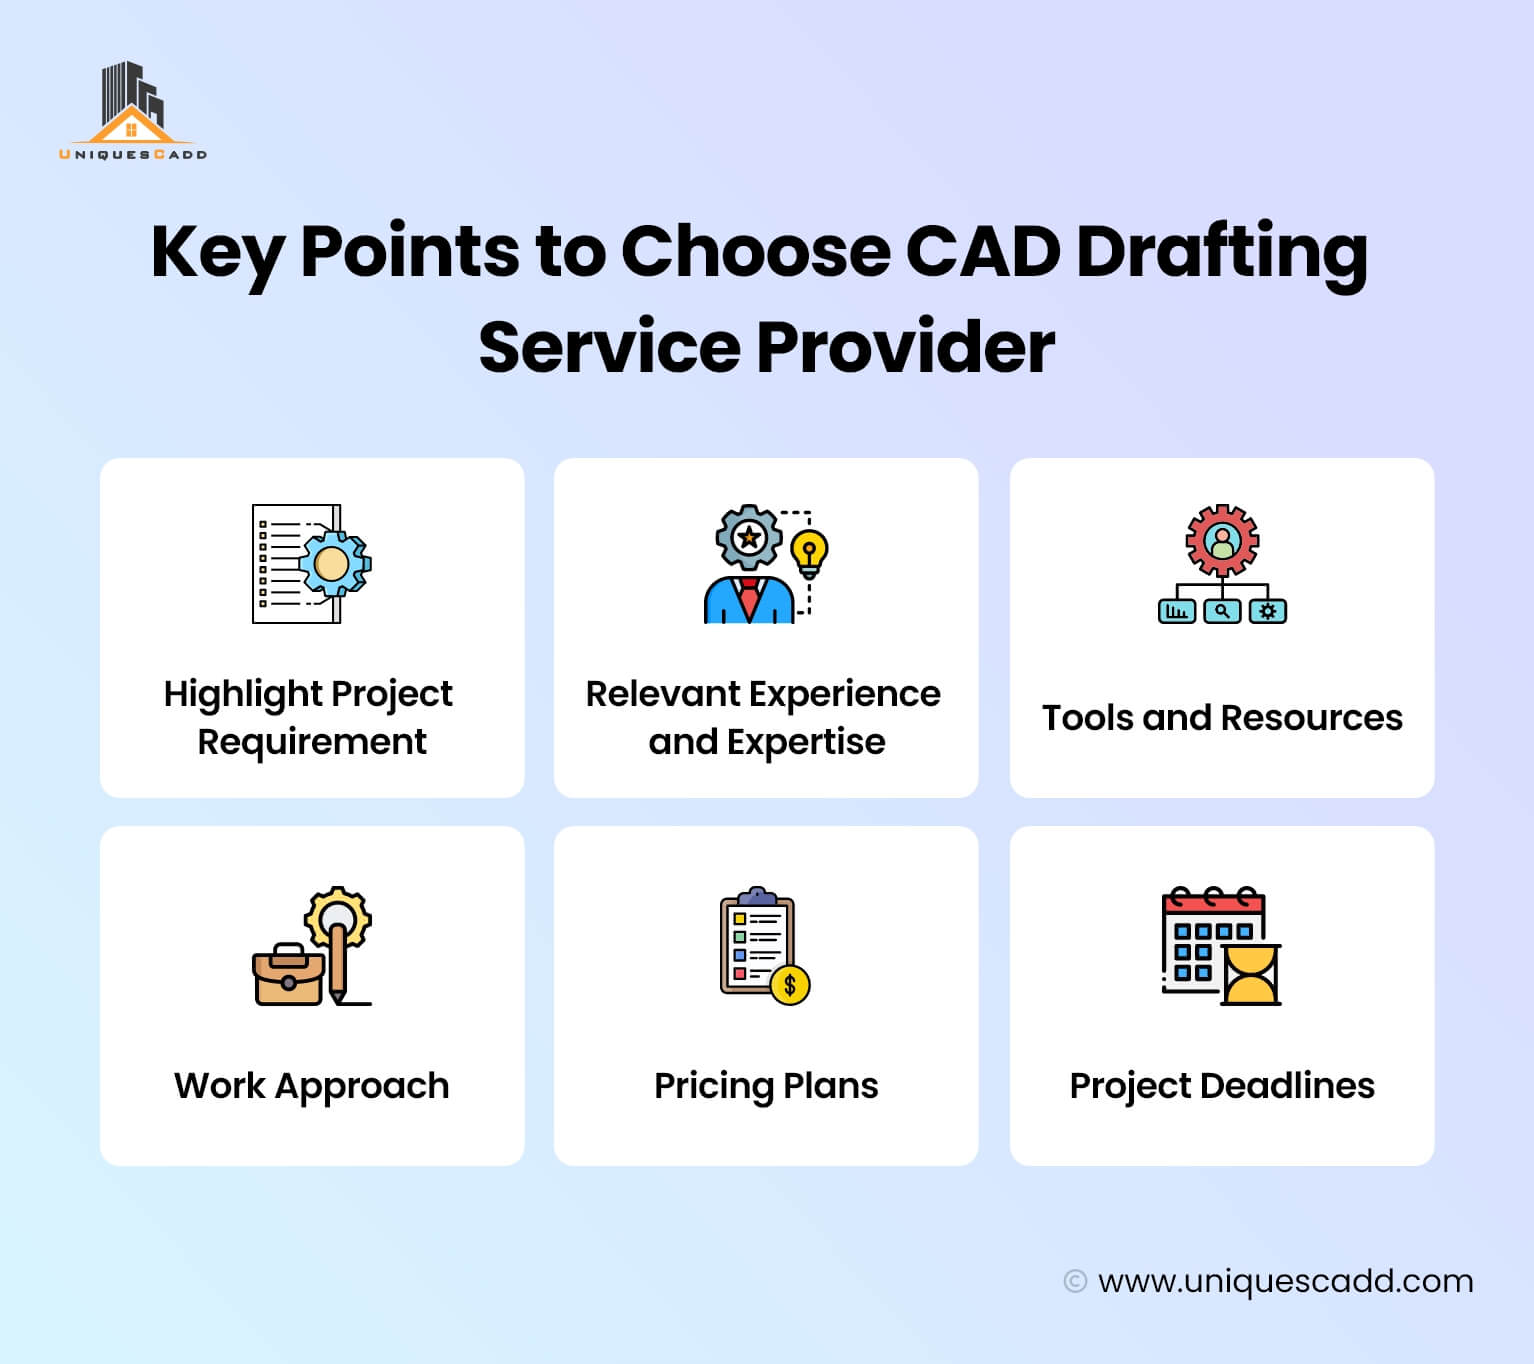 Key Points to Choose CAD Drafting Service Provider